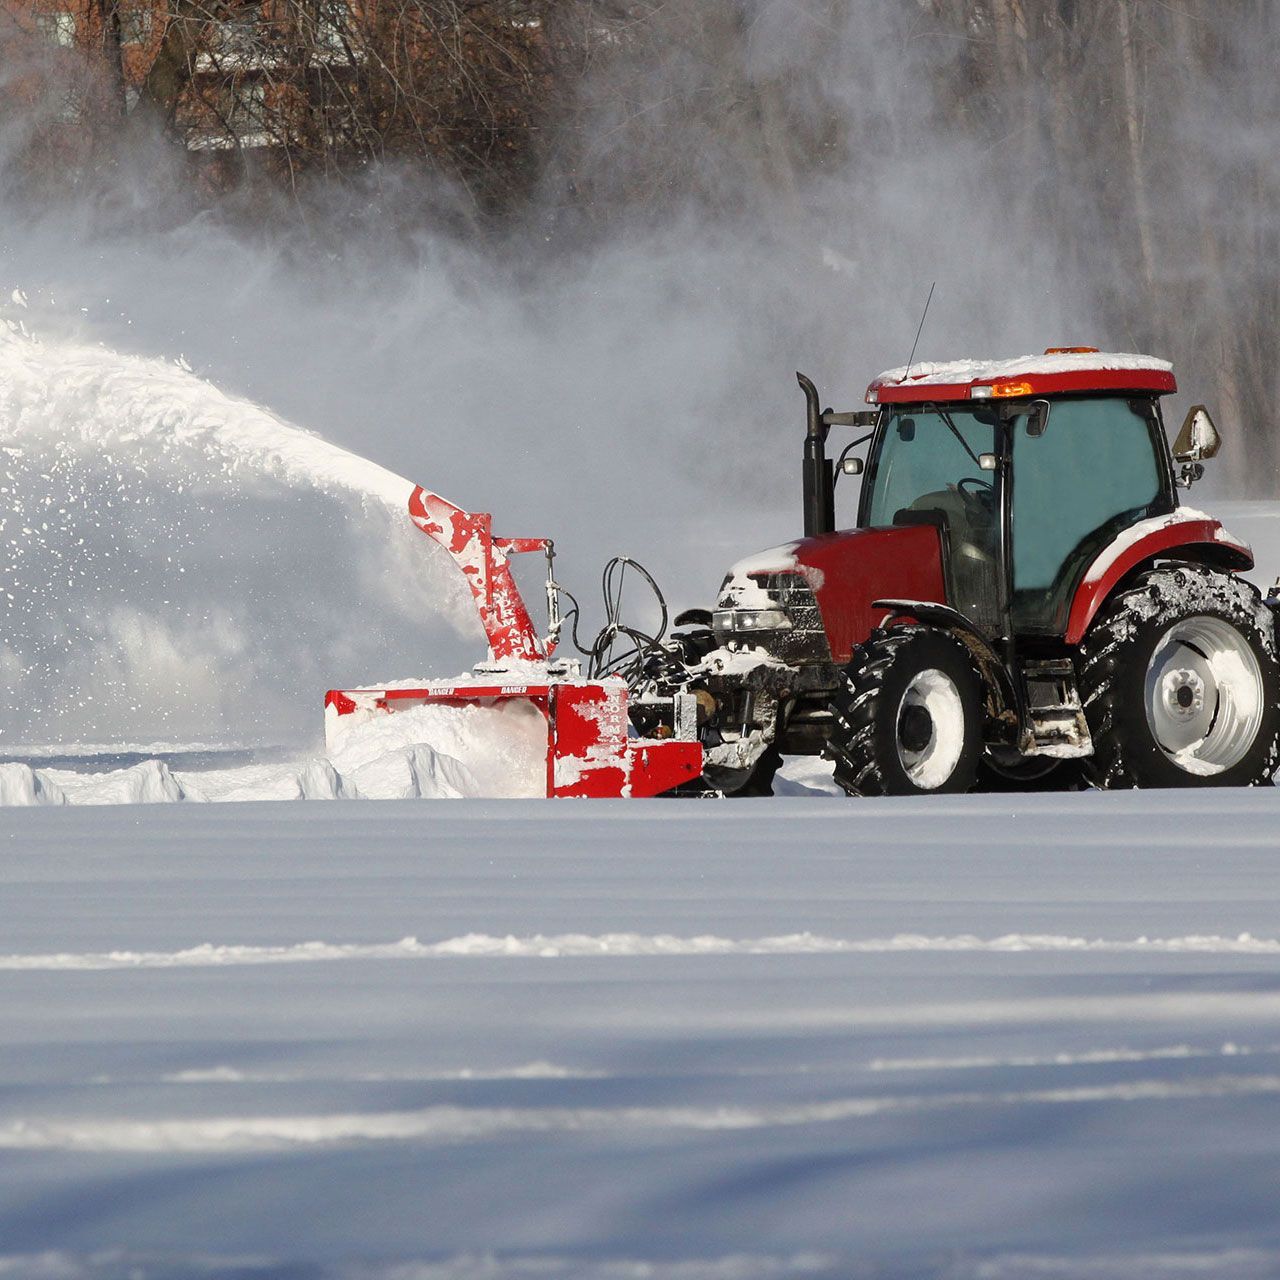 A red tractor is blowing snow in a snowy field.